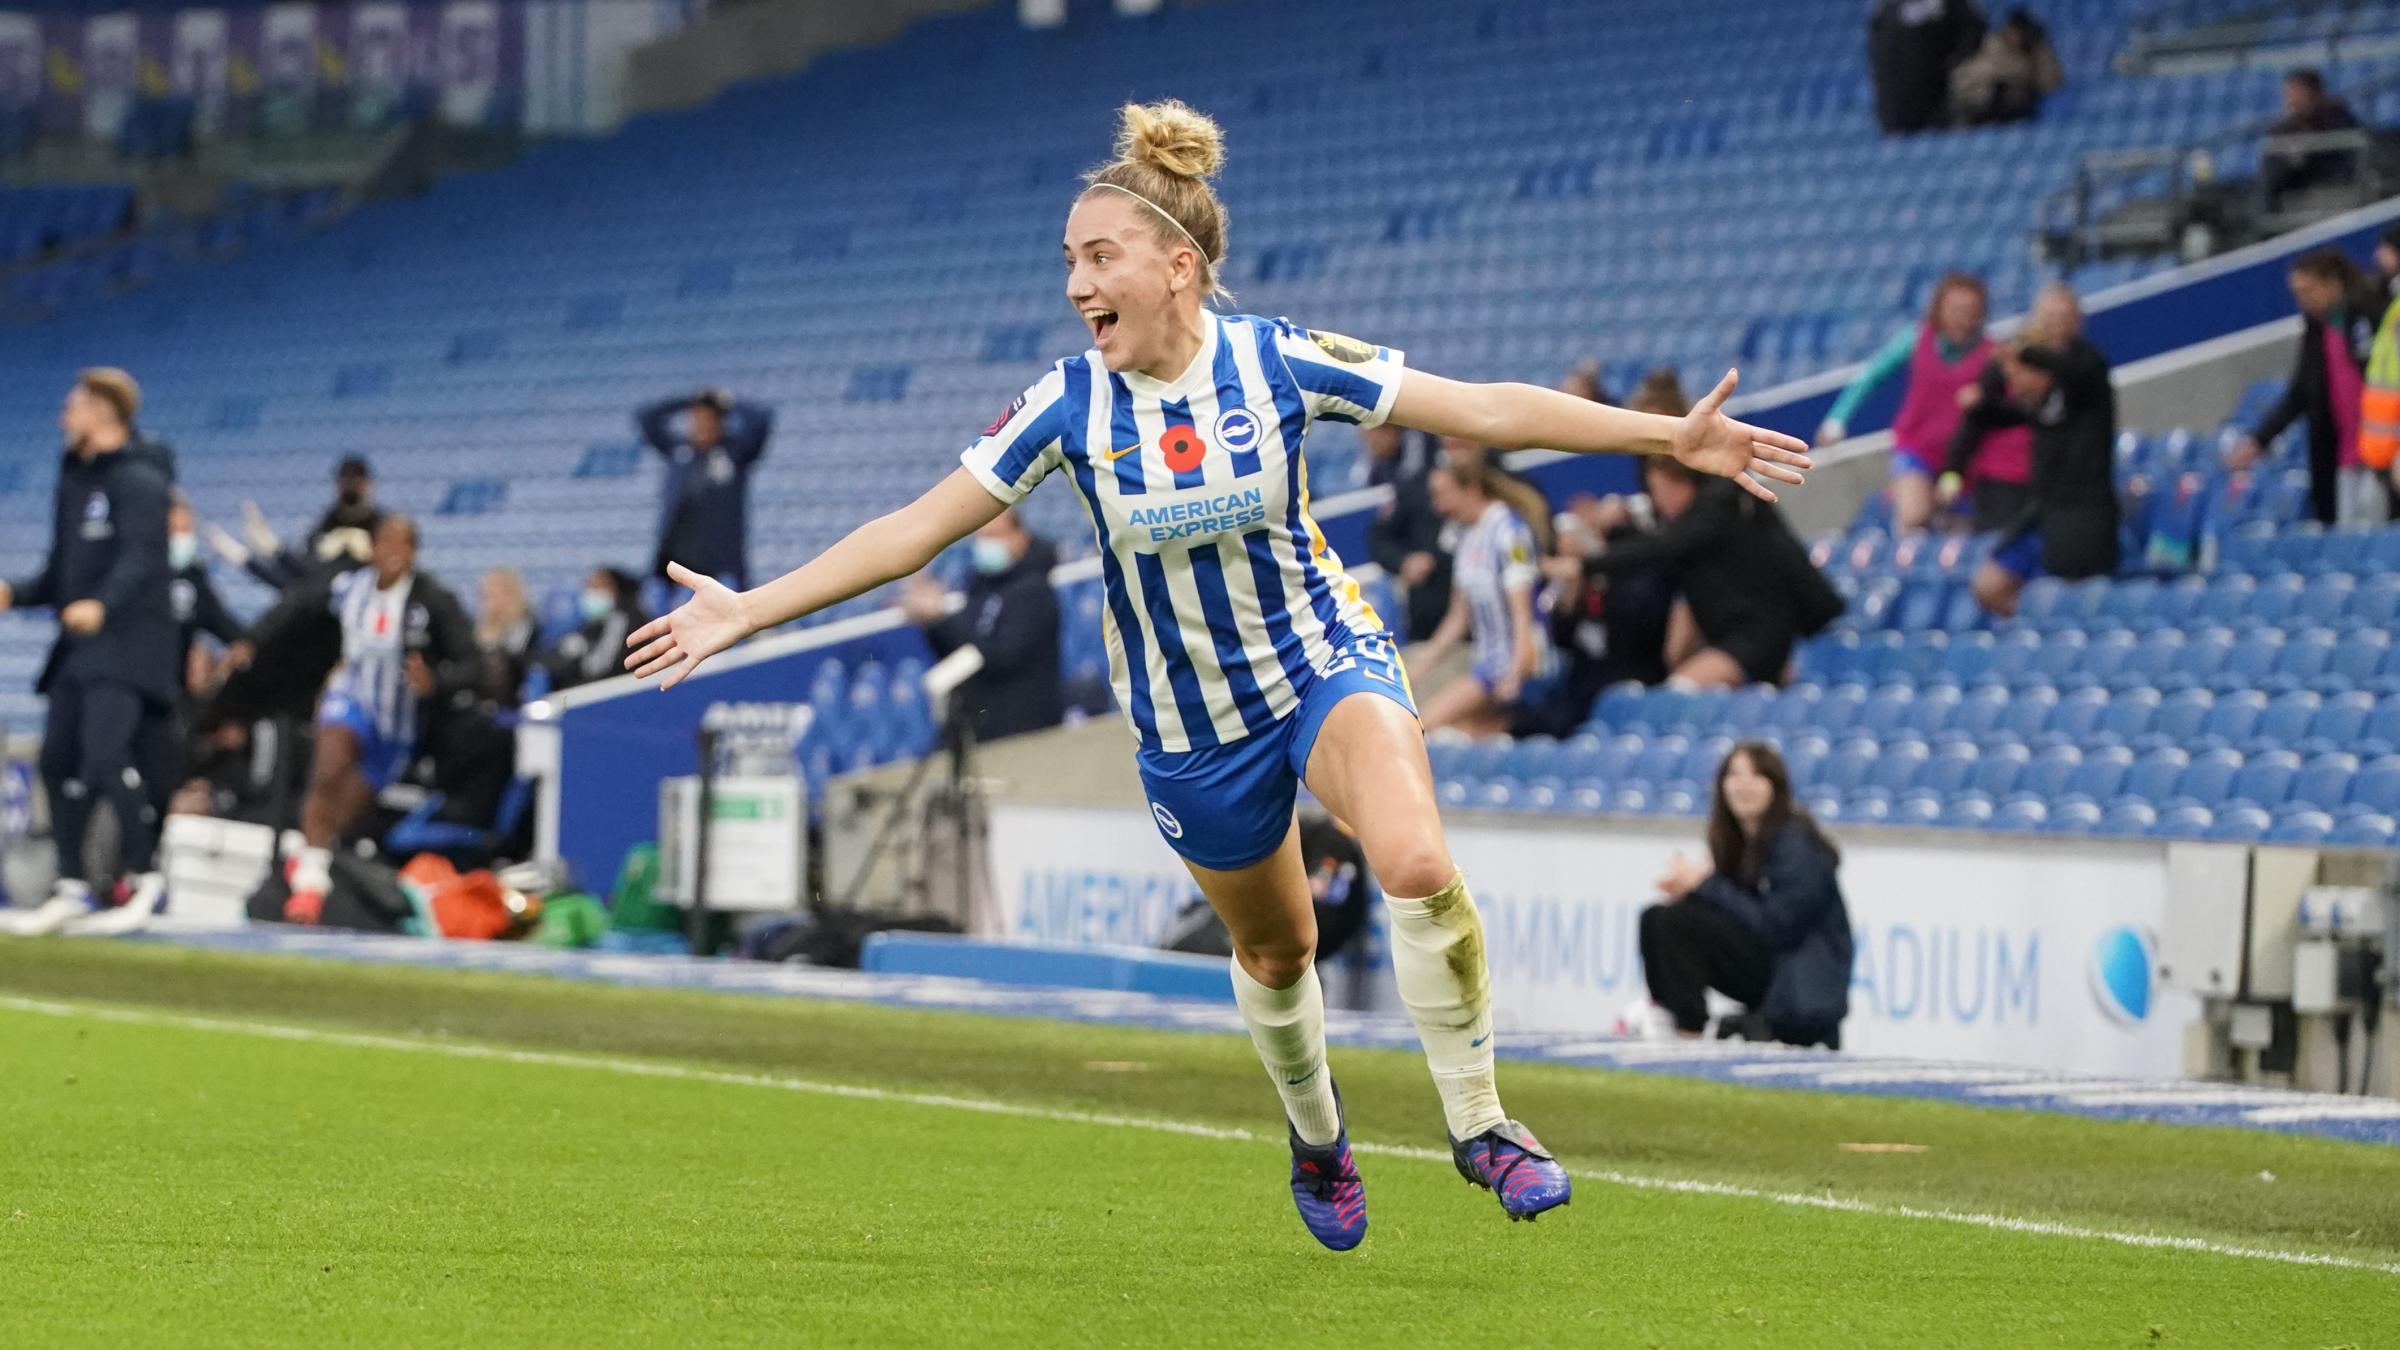 Brighton's Maisie Symonds on long road to recovery